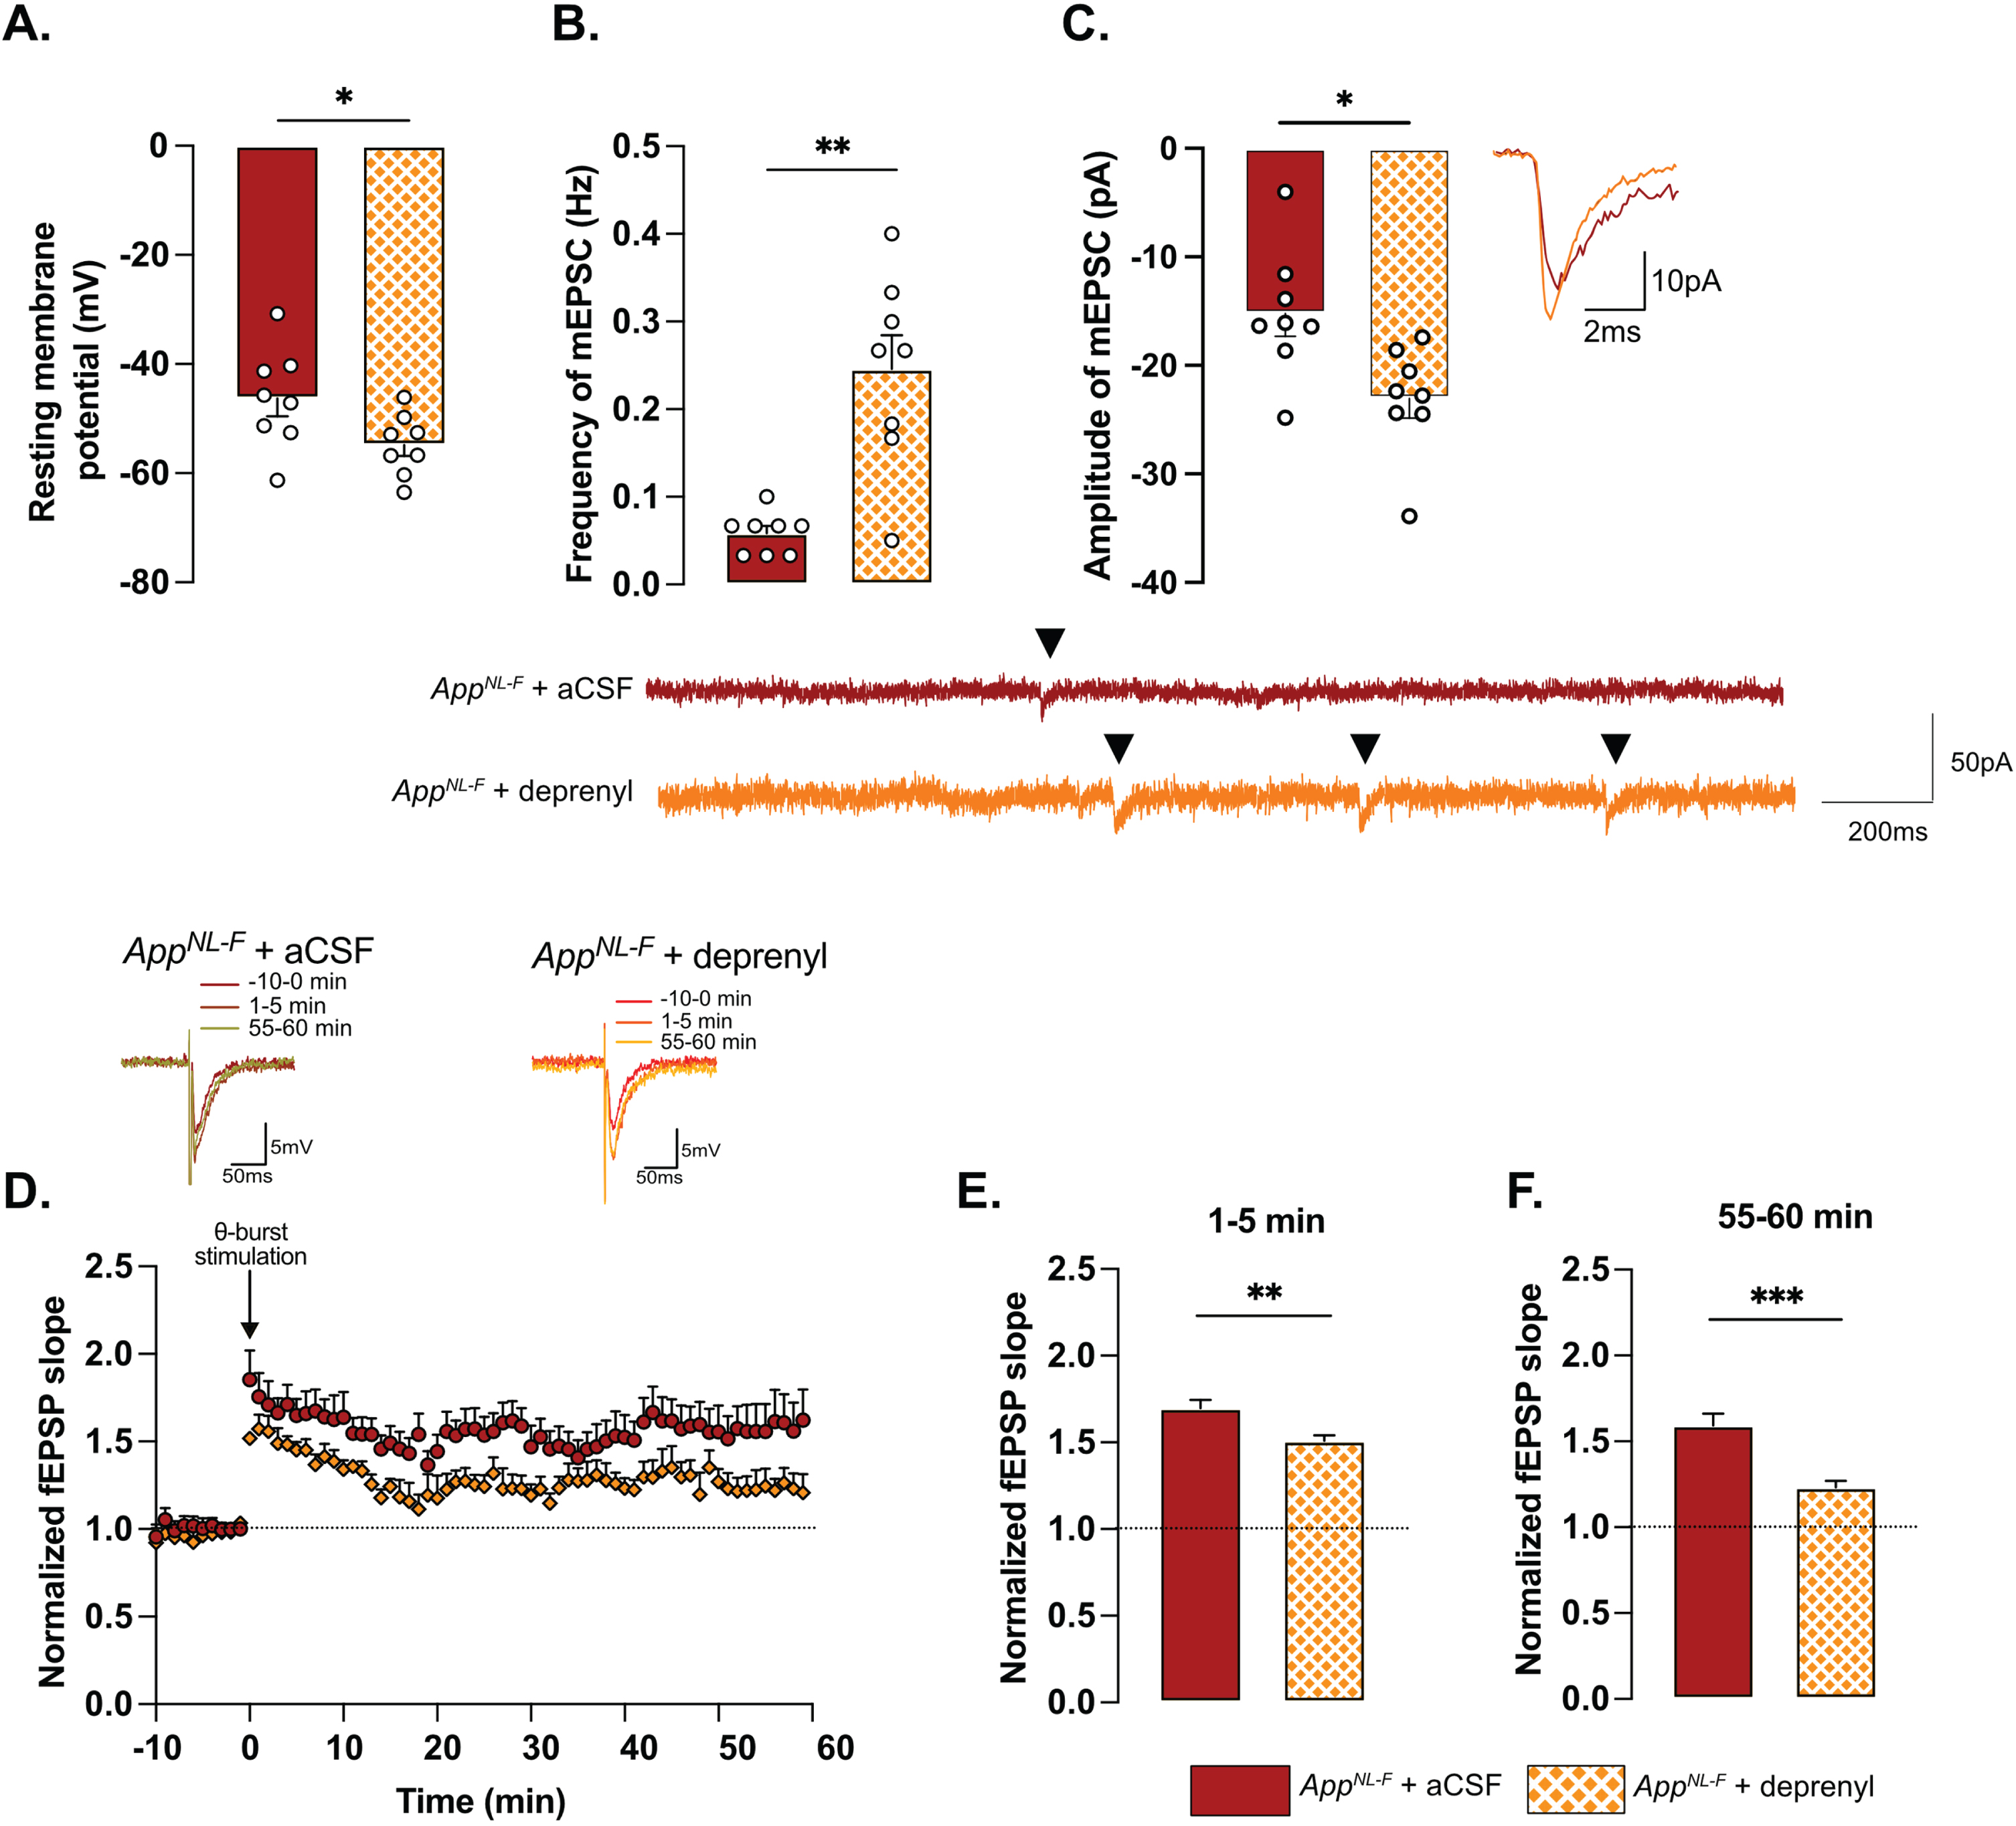 Retuned synapses after MAO-B blocking by deprenyl in 6-month-old AppNL-F mice. Pre-treatment of hippocampal slices with the MAO-B blocker deprenyl significantly decreases resting membrane potential in pyramidal cells in AppNL-F mice (A). Blocking MAO-B increased both frequency (B) and amplitude (C) of mEPSC. Representative traces are shown under graphs. Student t-test and Mann-Whitney test: **p < 0.01; ***p < 0.001 statistically significant as shown. AppNL-F + aCSF: n = 8 cells recorded in four animals; AppNL-F + deprenyl: n = 8 cells recorded in four animals. The subthreshold theta-burst (θ-burst) stimulation induced long term potentiation in both treated and untreated slices from AppNL-F mice (D). Representative traces are shown on top. When we compared the average fEPSP magnitude at 0–5 min and 55–60 min after stimulation, the potentiation was significantly lower after deprenyl pre-treatment (E, F). Mann-Whitney test: **p < 0.01, ***p < 0.001 statistically significant as shown. AppNL-F + aCSF: n = 6 recordings in four animals, AppNL-F + deprenyl: n = 5 recordings in three animals.